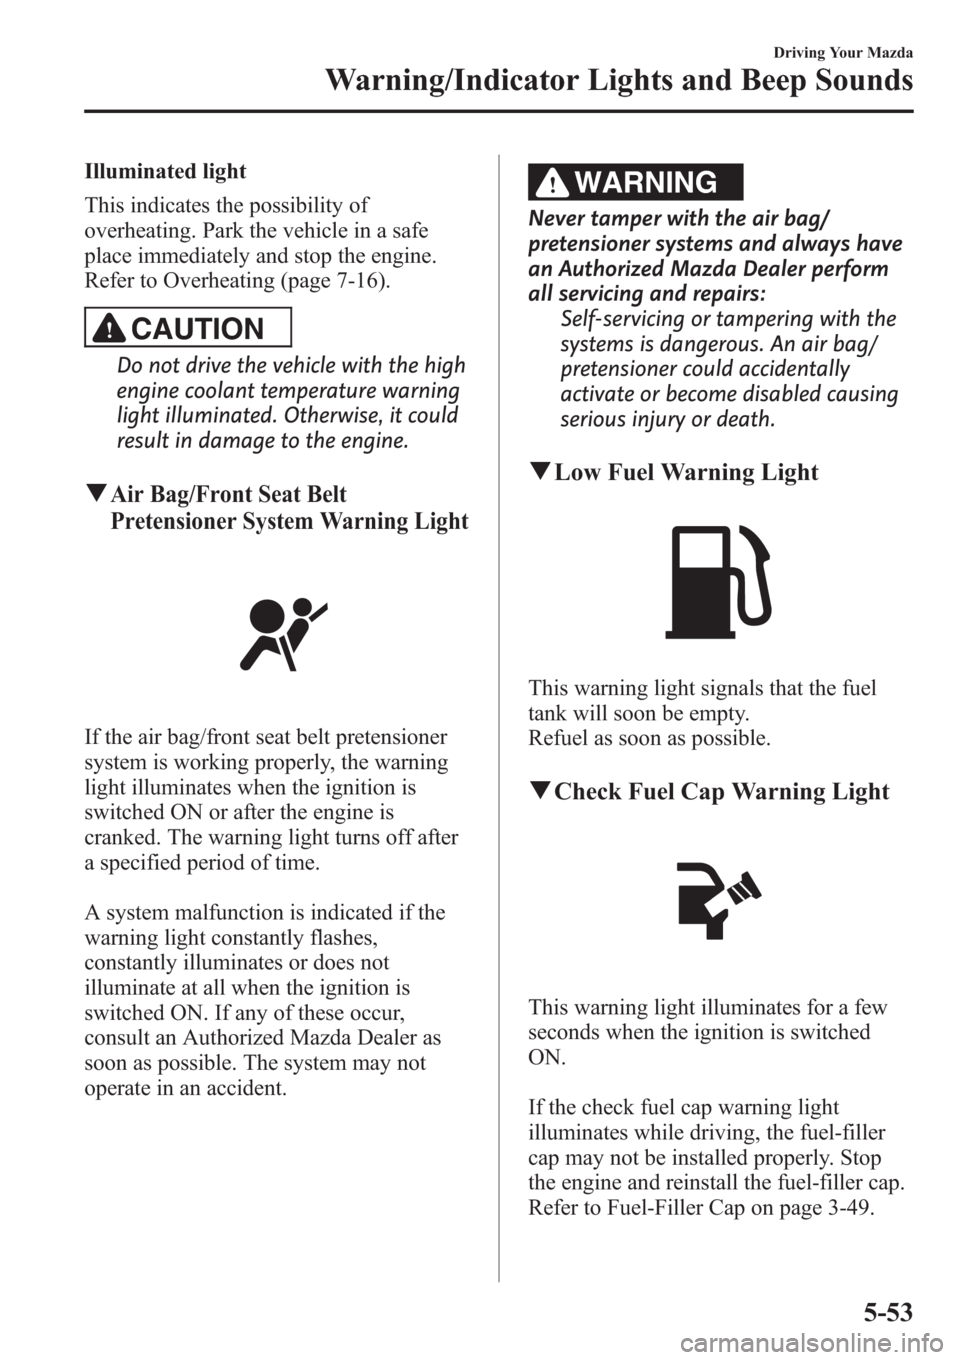 MAZDA MODEL 3 HATCHBACK 2013  Owners Manual (in English) Illuminated light
This indicates the possibility of
overheating. Park the vehicle in a safe
place immediately and stop the engine.
Refer to Overheating (page 7-16).
CAUTION
Do not drive the vehicle wi